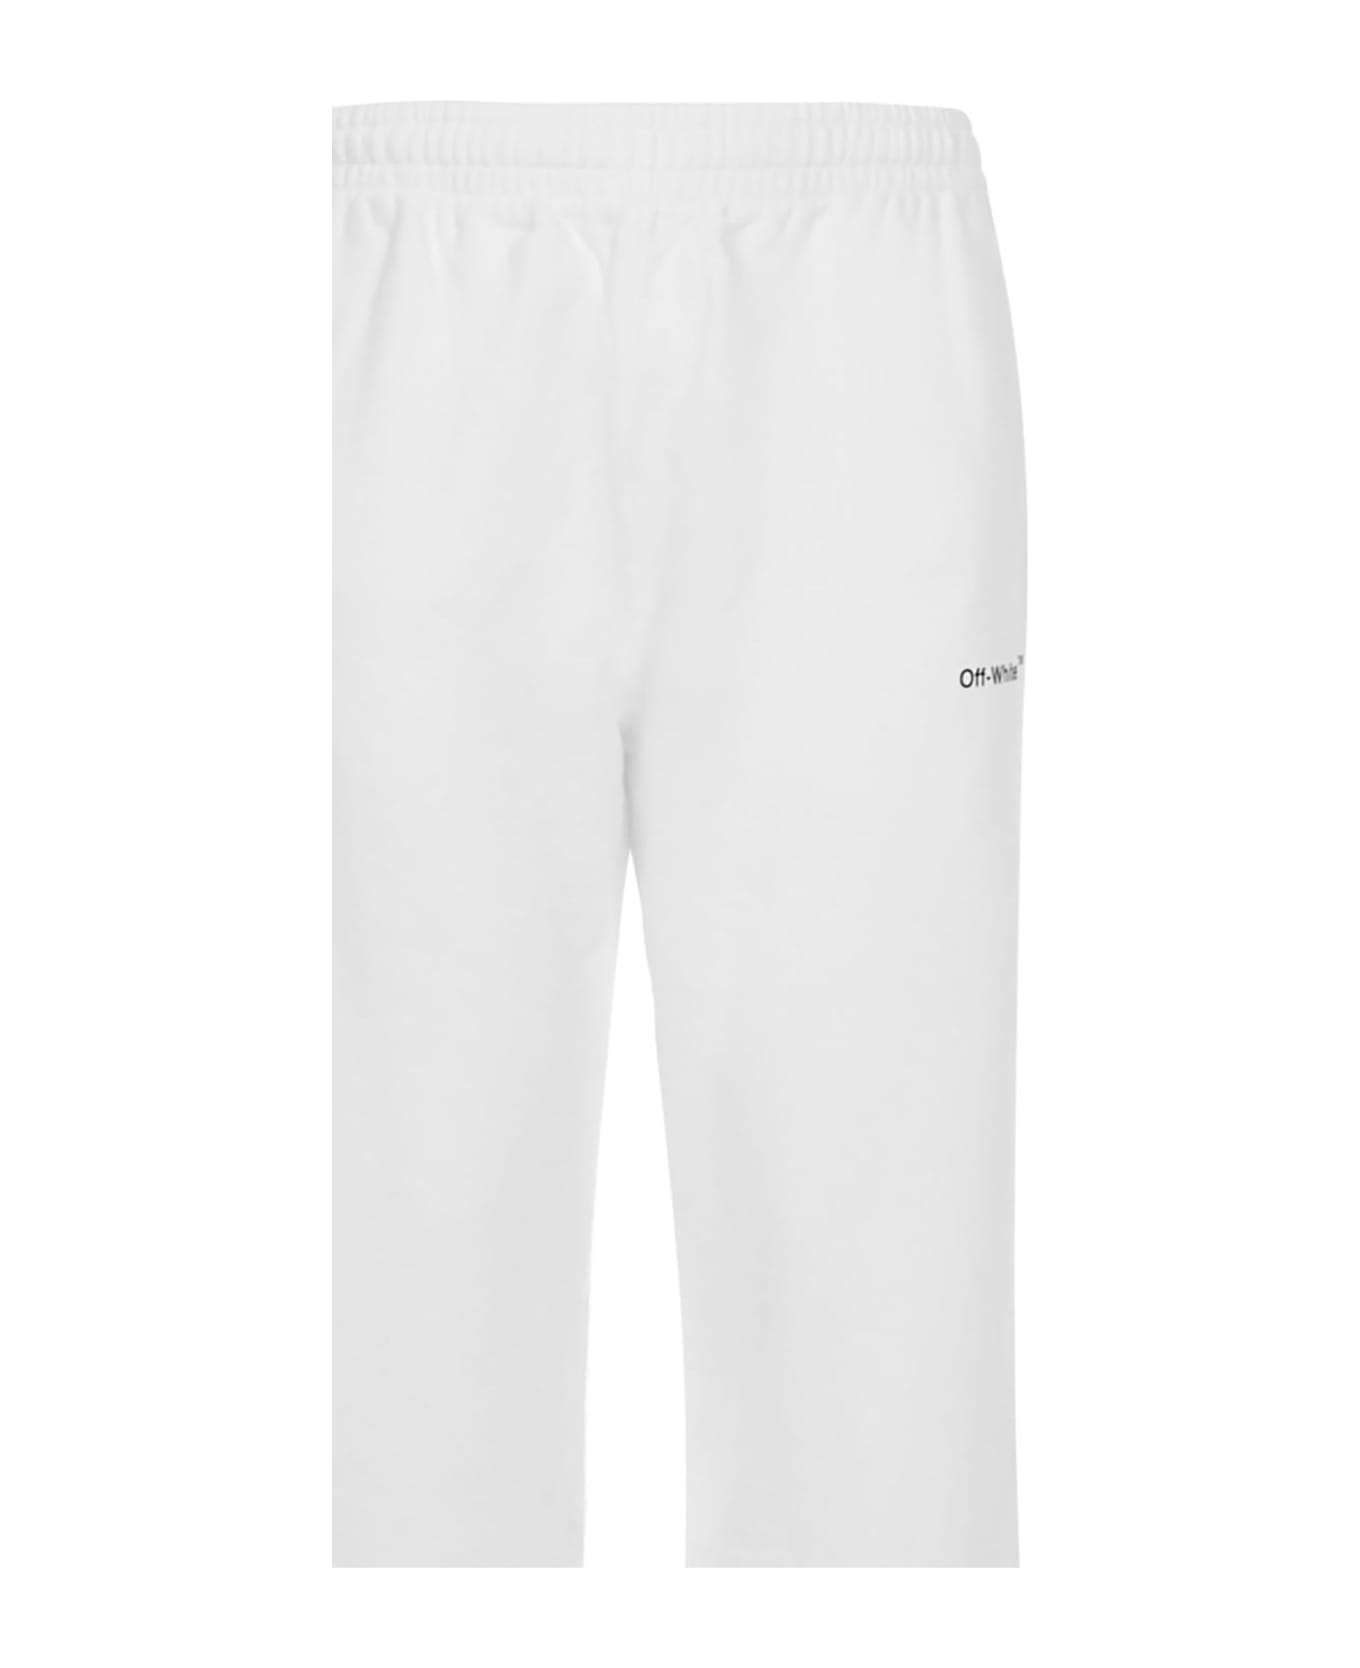 Off-White Trousers - WHITE